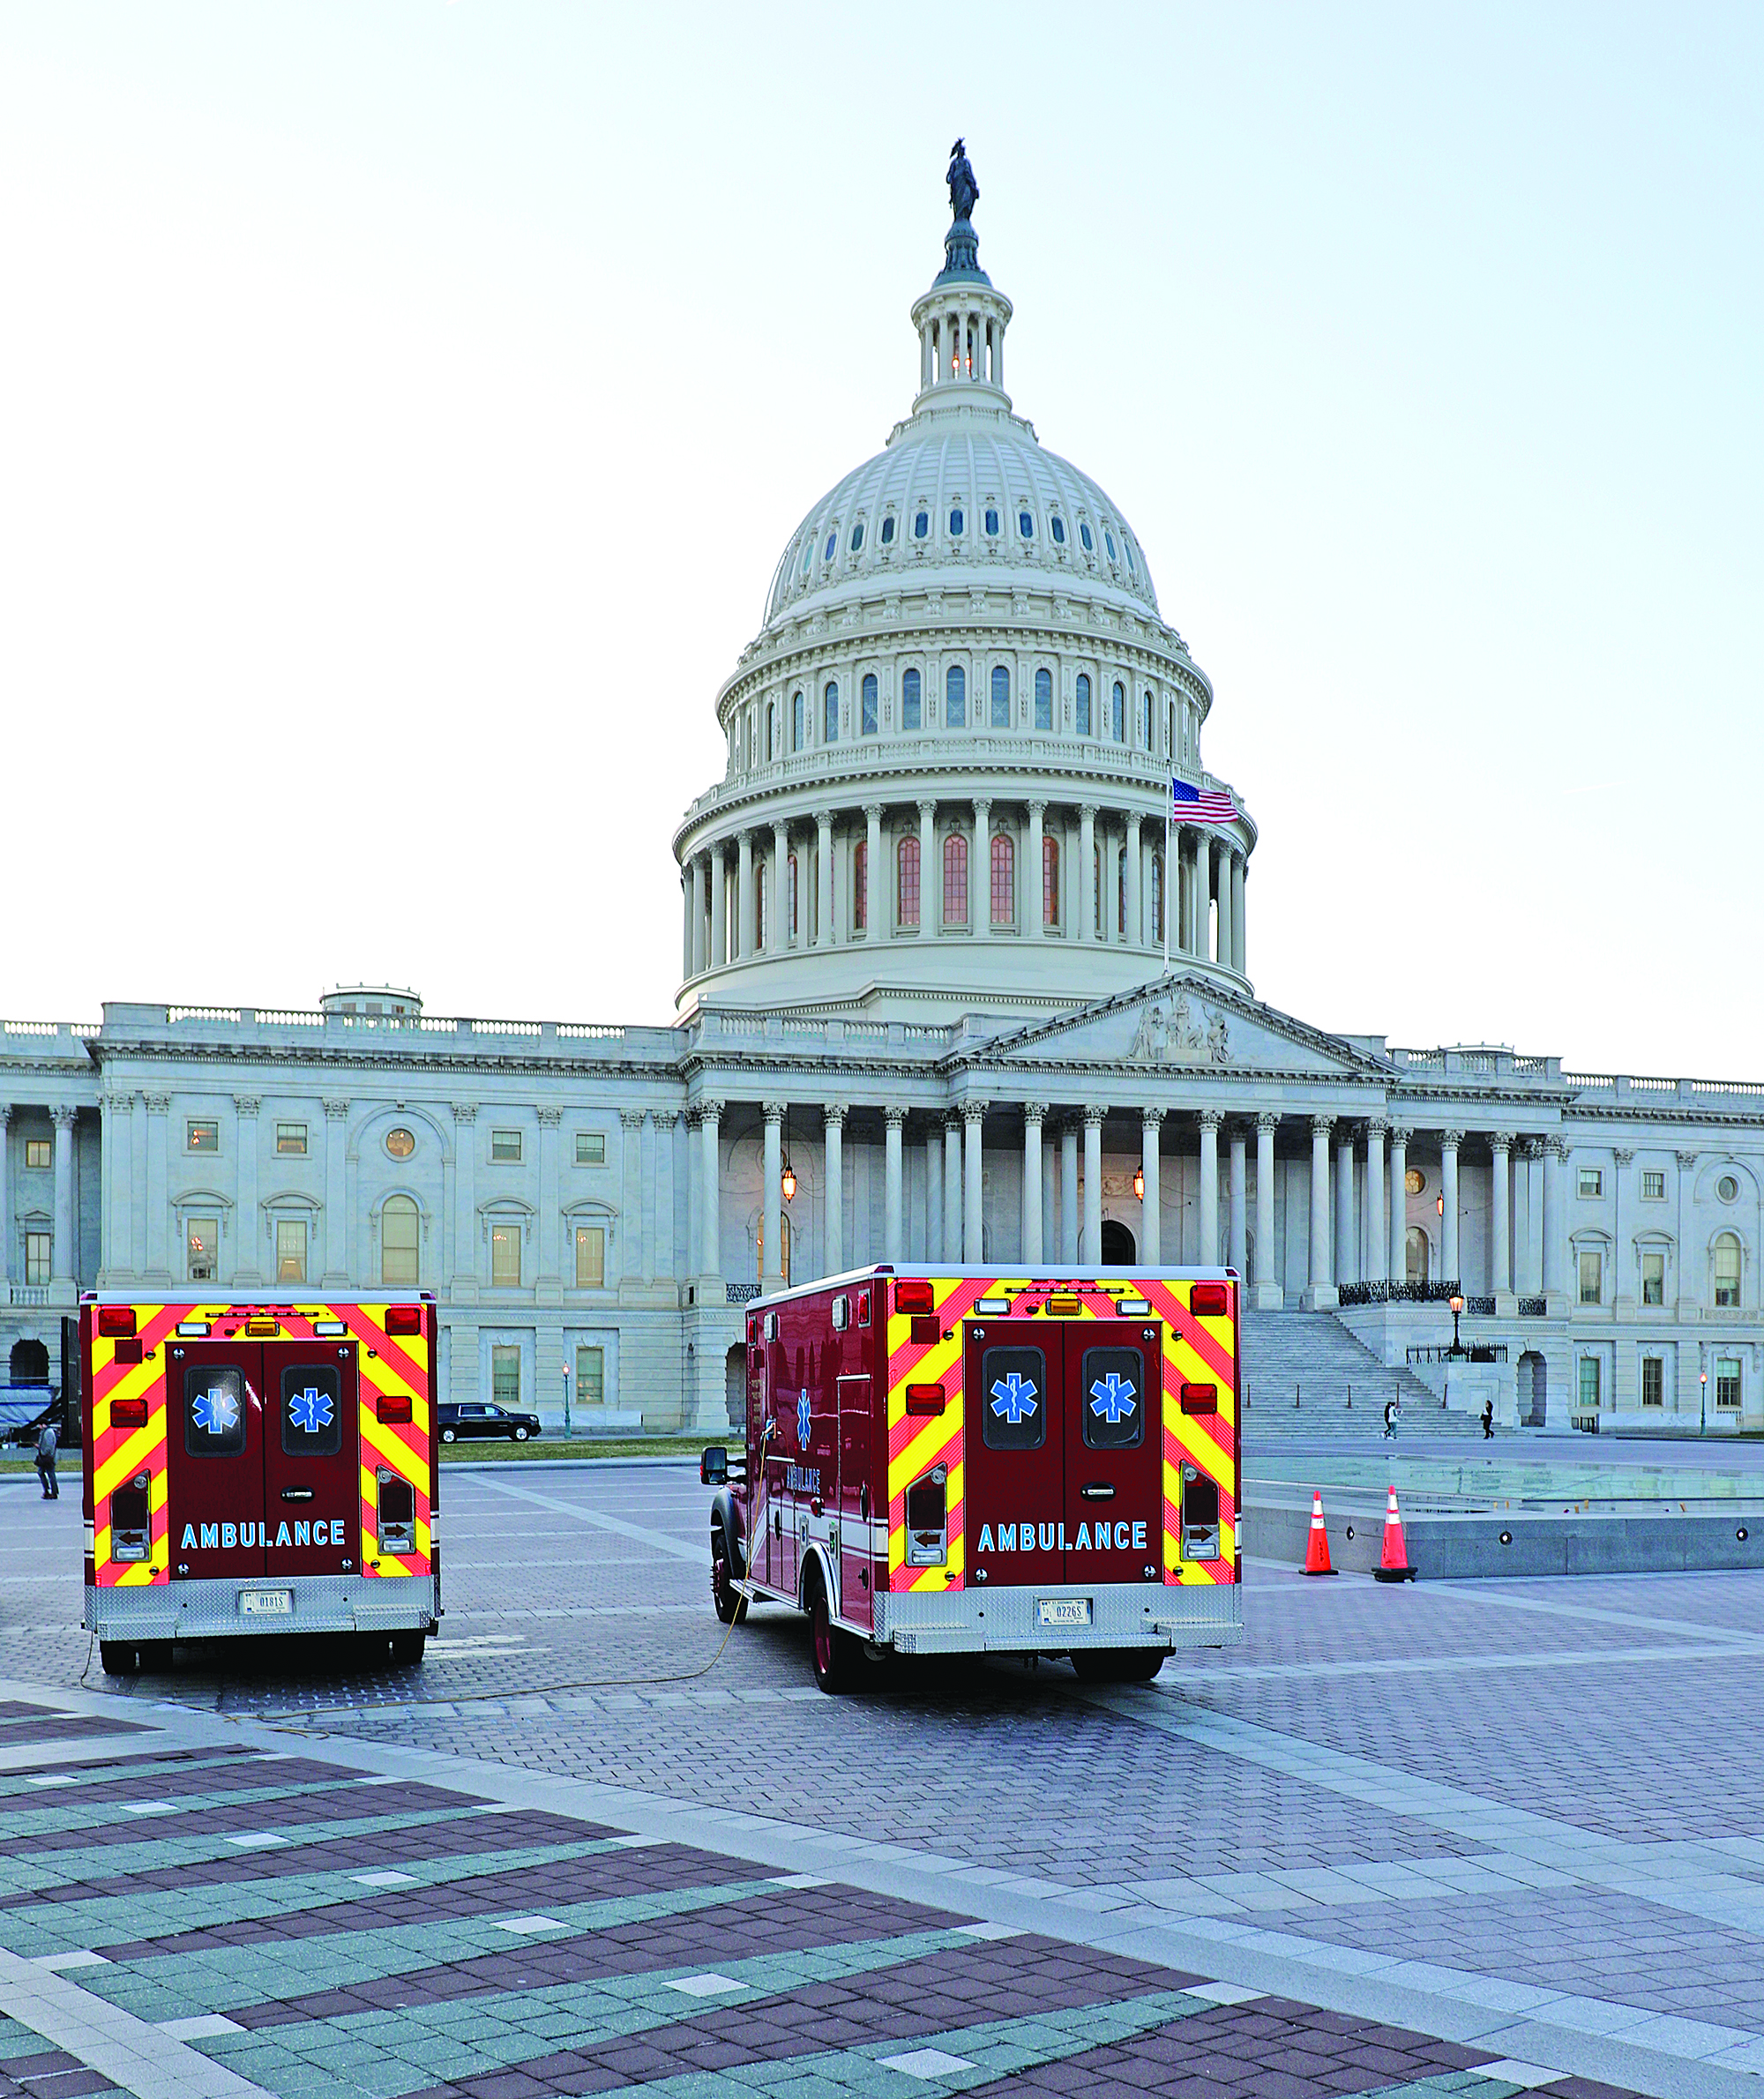 Ambulances are parked in front of the U.S. Capitol building in Washington. Ledger photo by JJ Francais